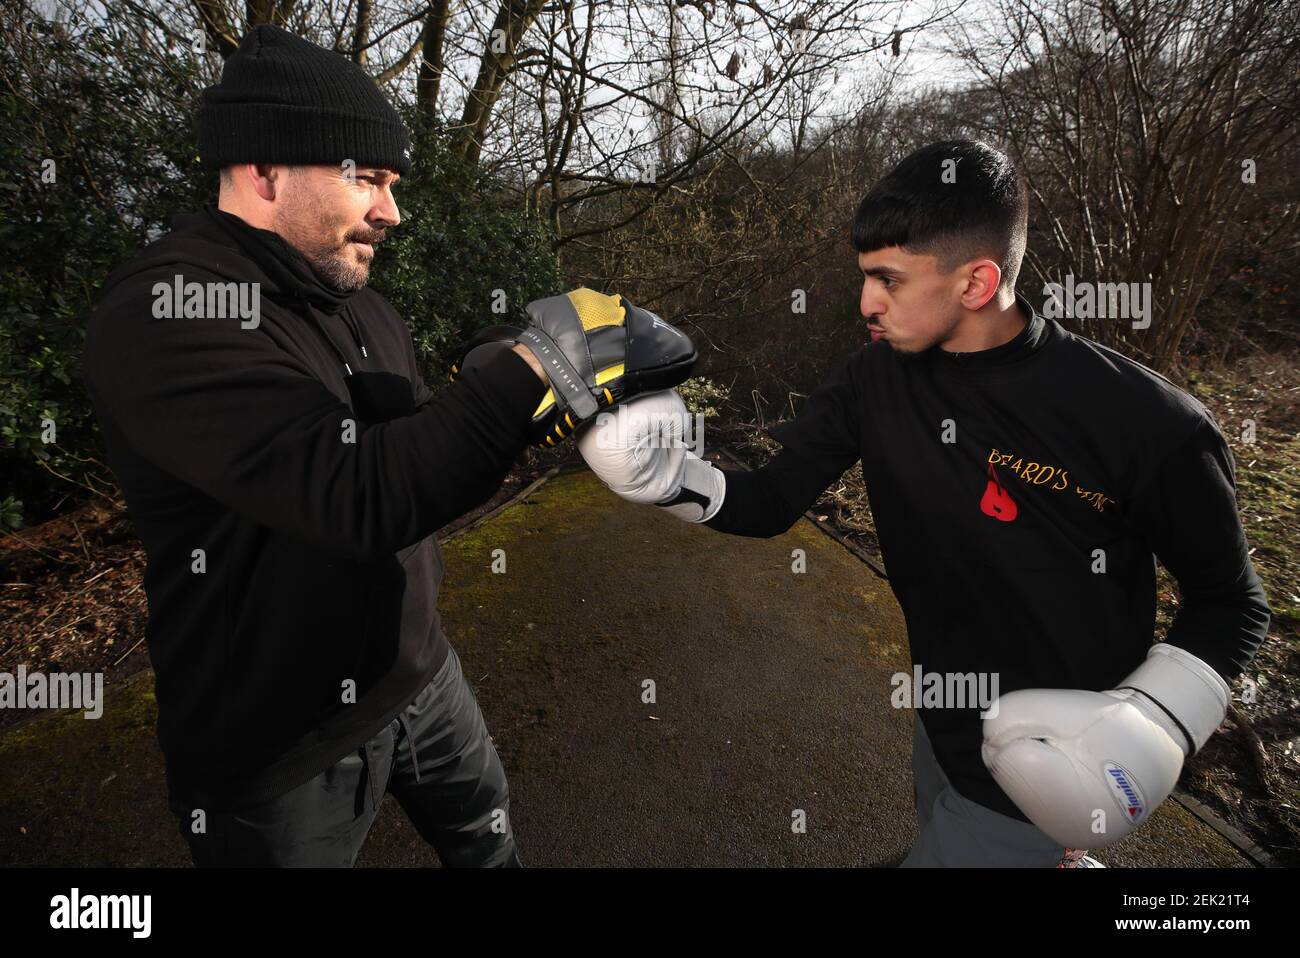 Boxer Raheem Mohammed from Telford trains at Vernon Park, Stockport. Due to  Covid-19 restrictions he is unable to train at his usual gym, owned by  manager and Trainer, Lee Beard (left), and